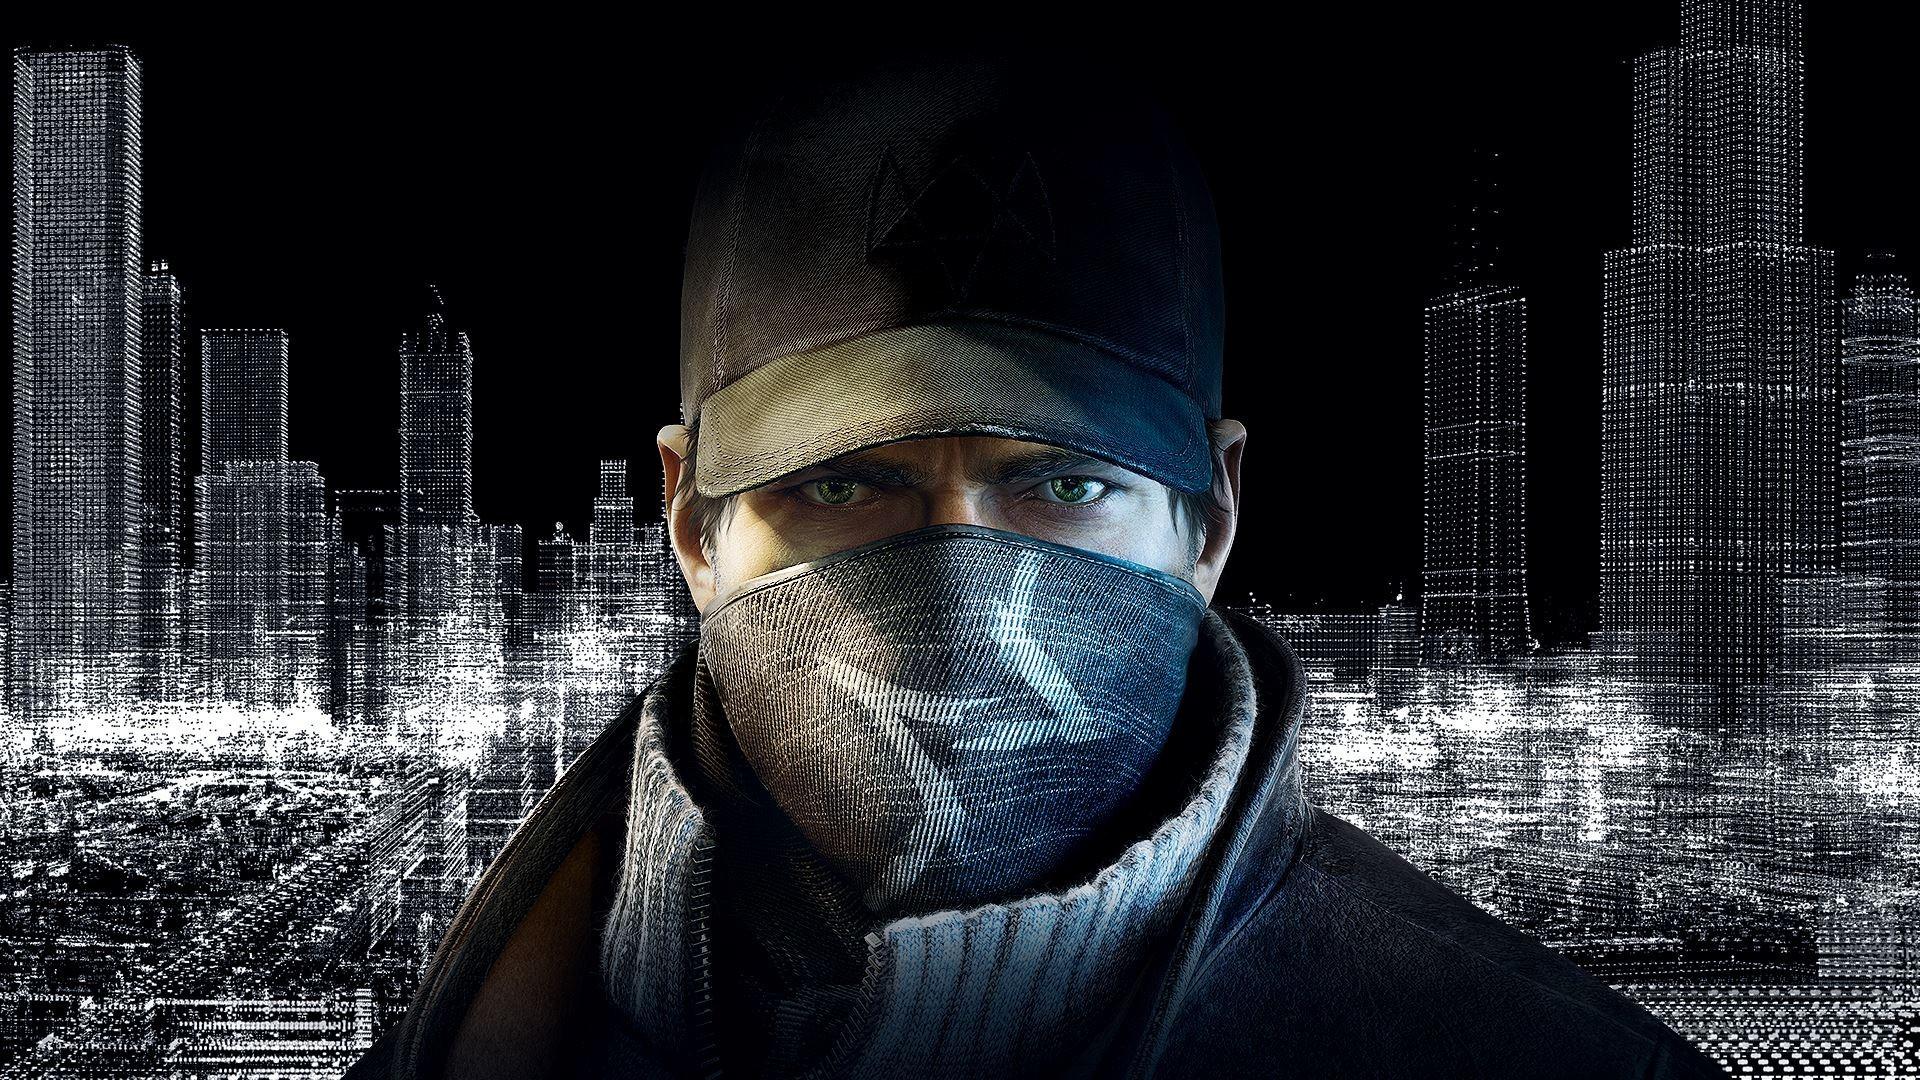 Watch Dogs, Aiden Pierce, Ubisoft Montreal - Watch Dogs Images Hd - HD Wallpaper 